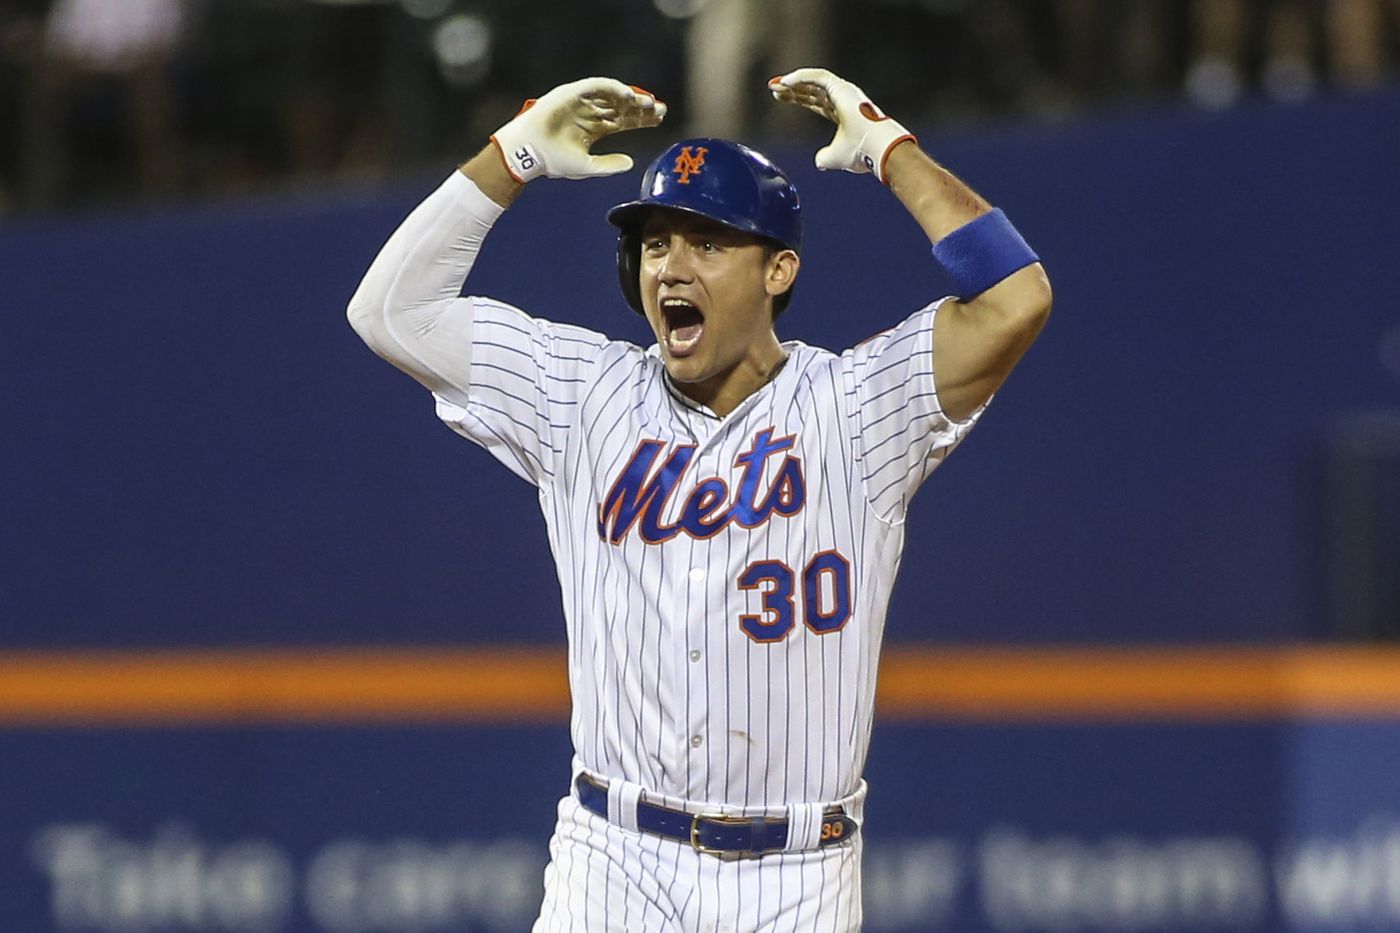 The reason why Michael Conforto has not signed according to